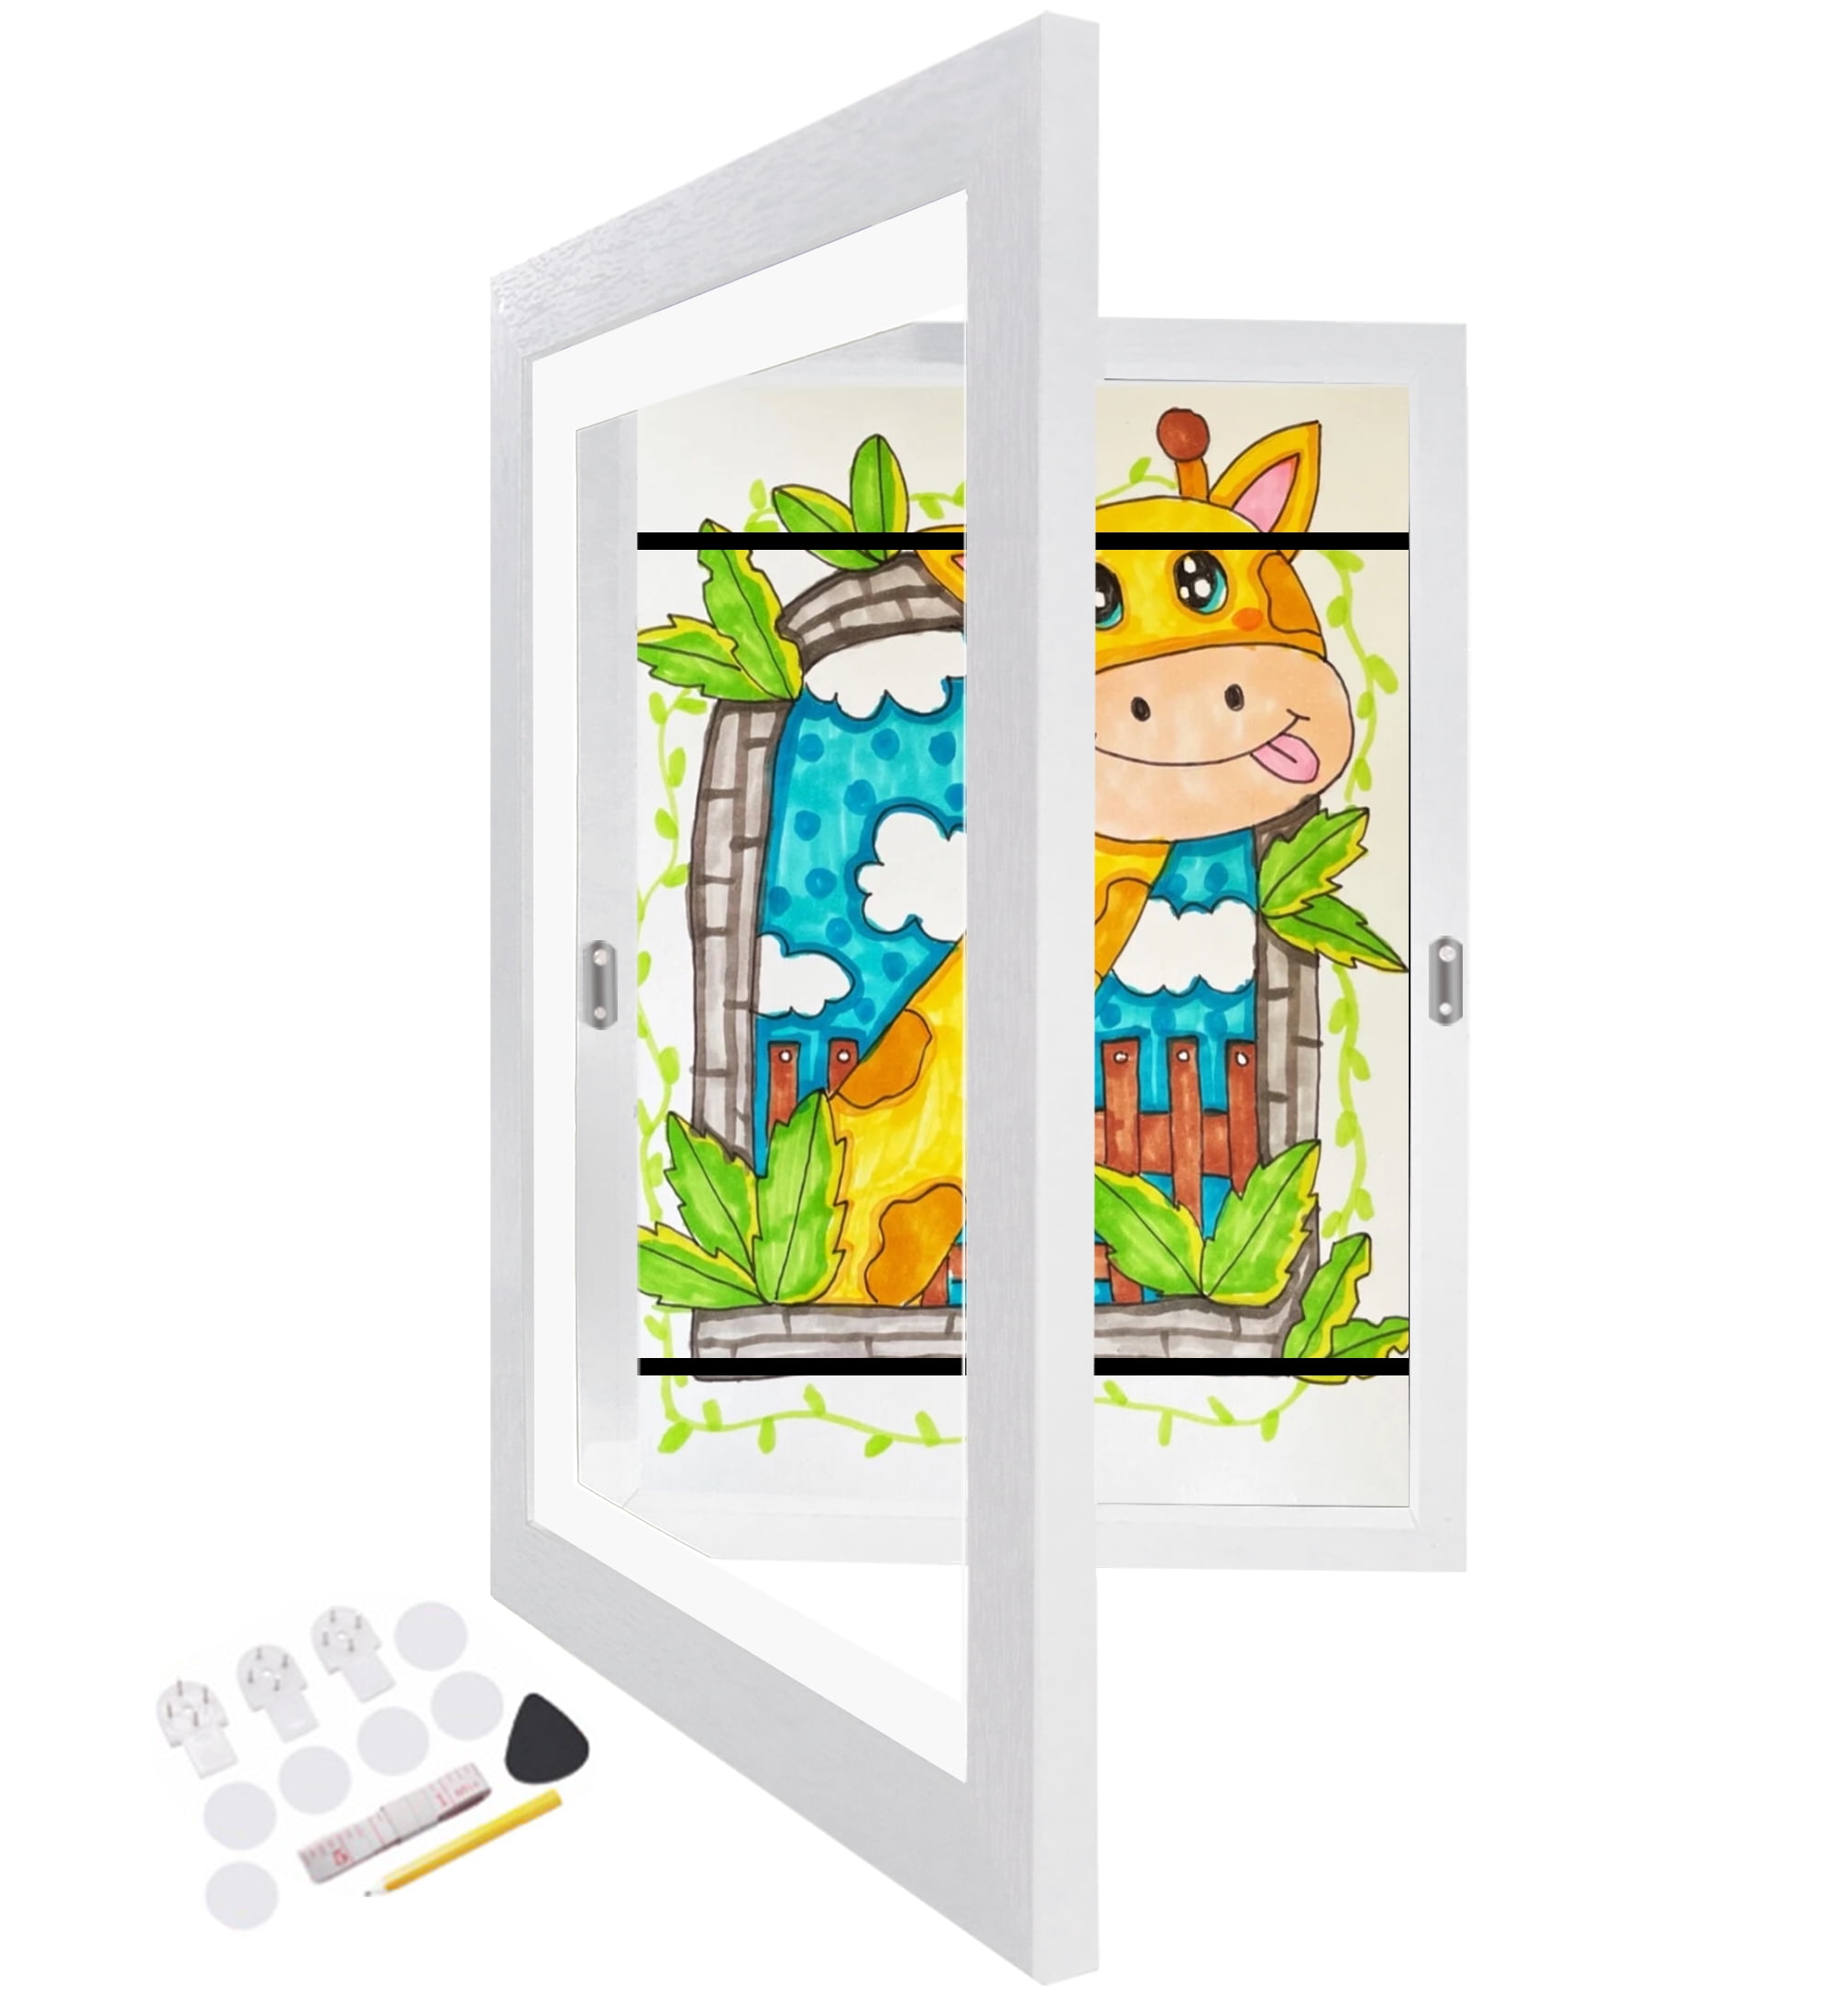  Manooby Front Opening Kids Art Display Frames